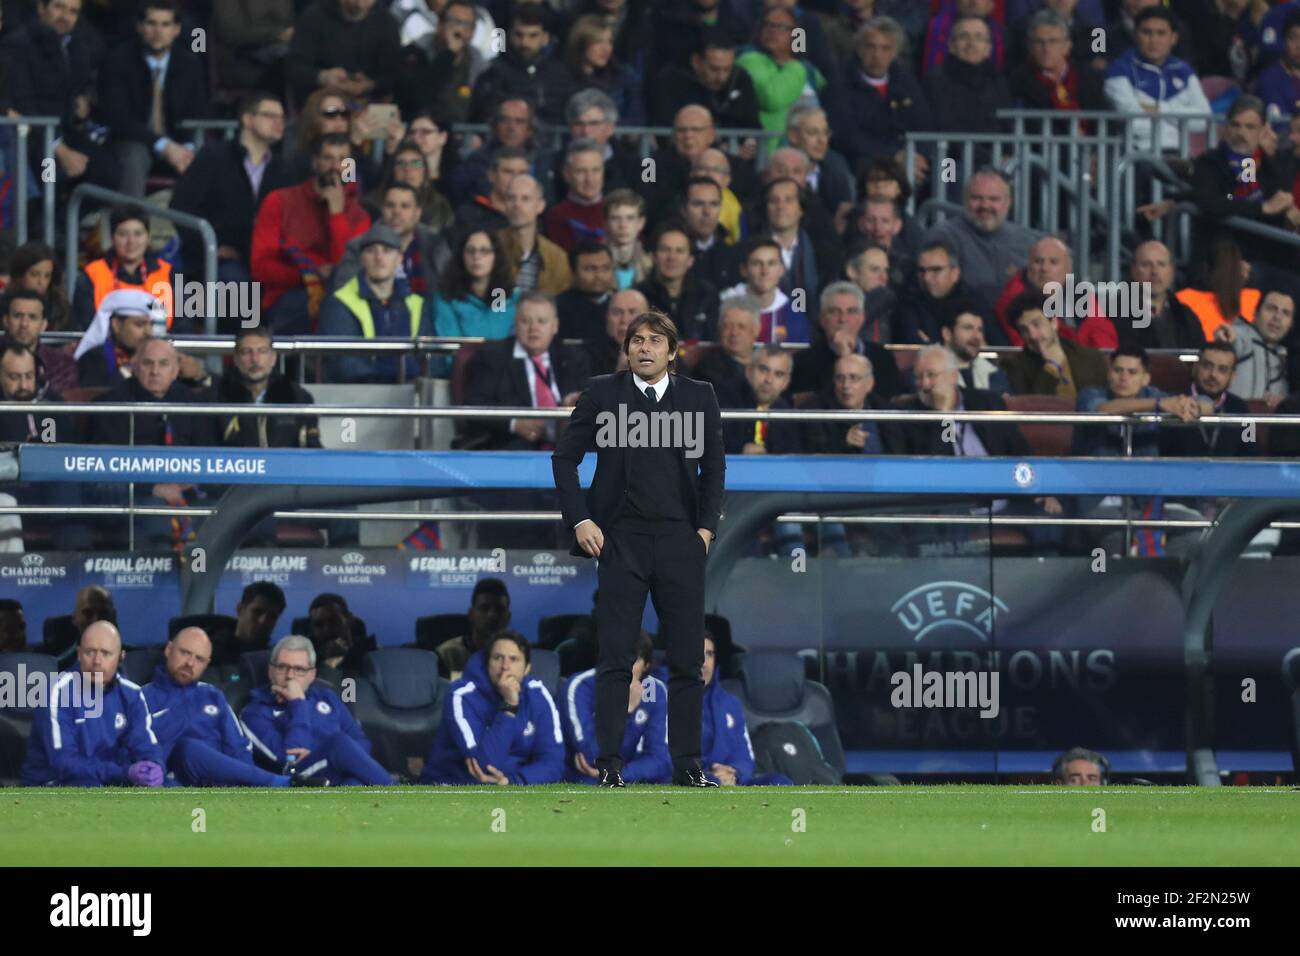 Head Coach Antonio Conte Of Chelsea Fc During The Uefa Champions League Round Of 16 2nd Leg Football Match Between Fc Barcelona And Chelsea Fc On March 14 18 At Camp Nou